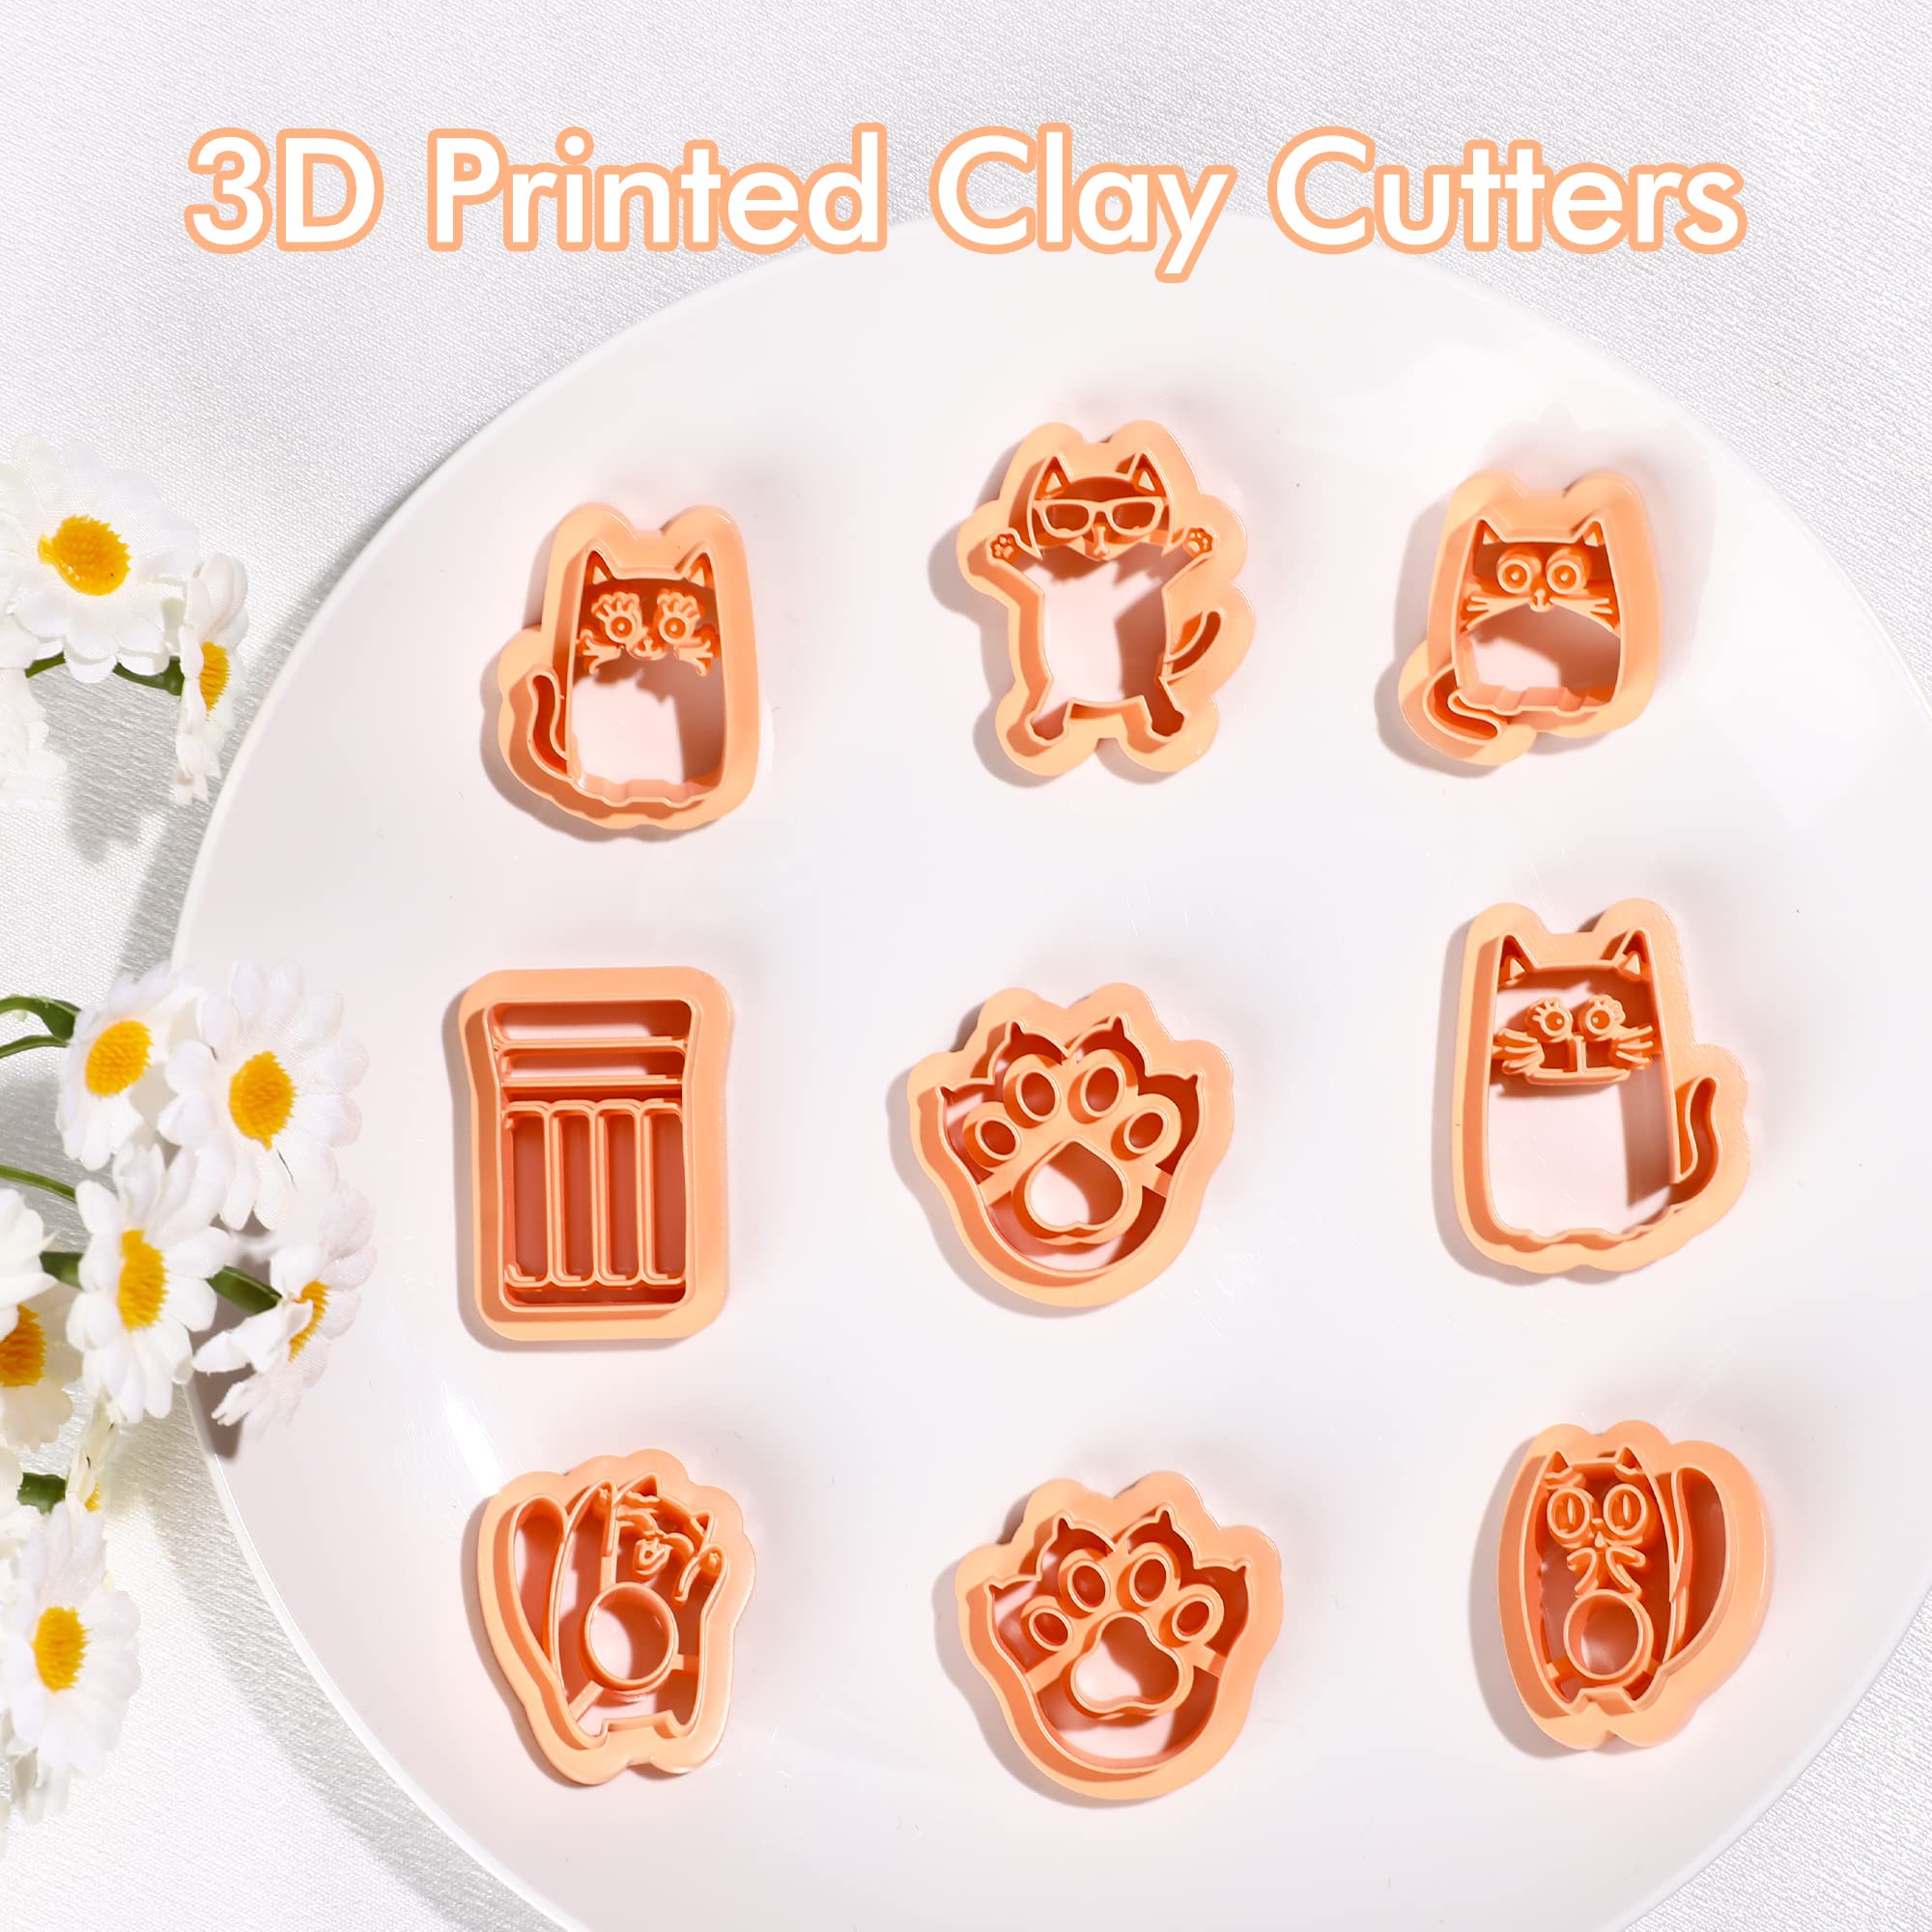  Puocaon 70s Valentines Clay Cutters - 10 Pcs Clay